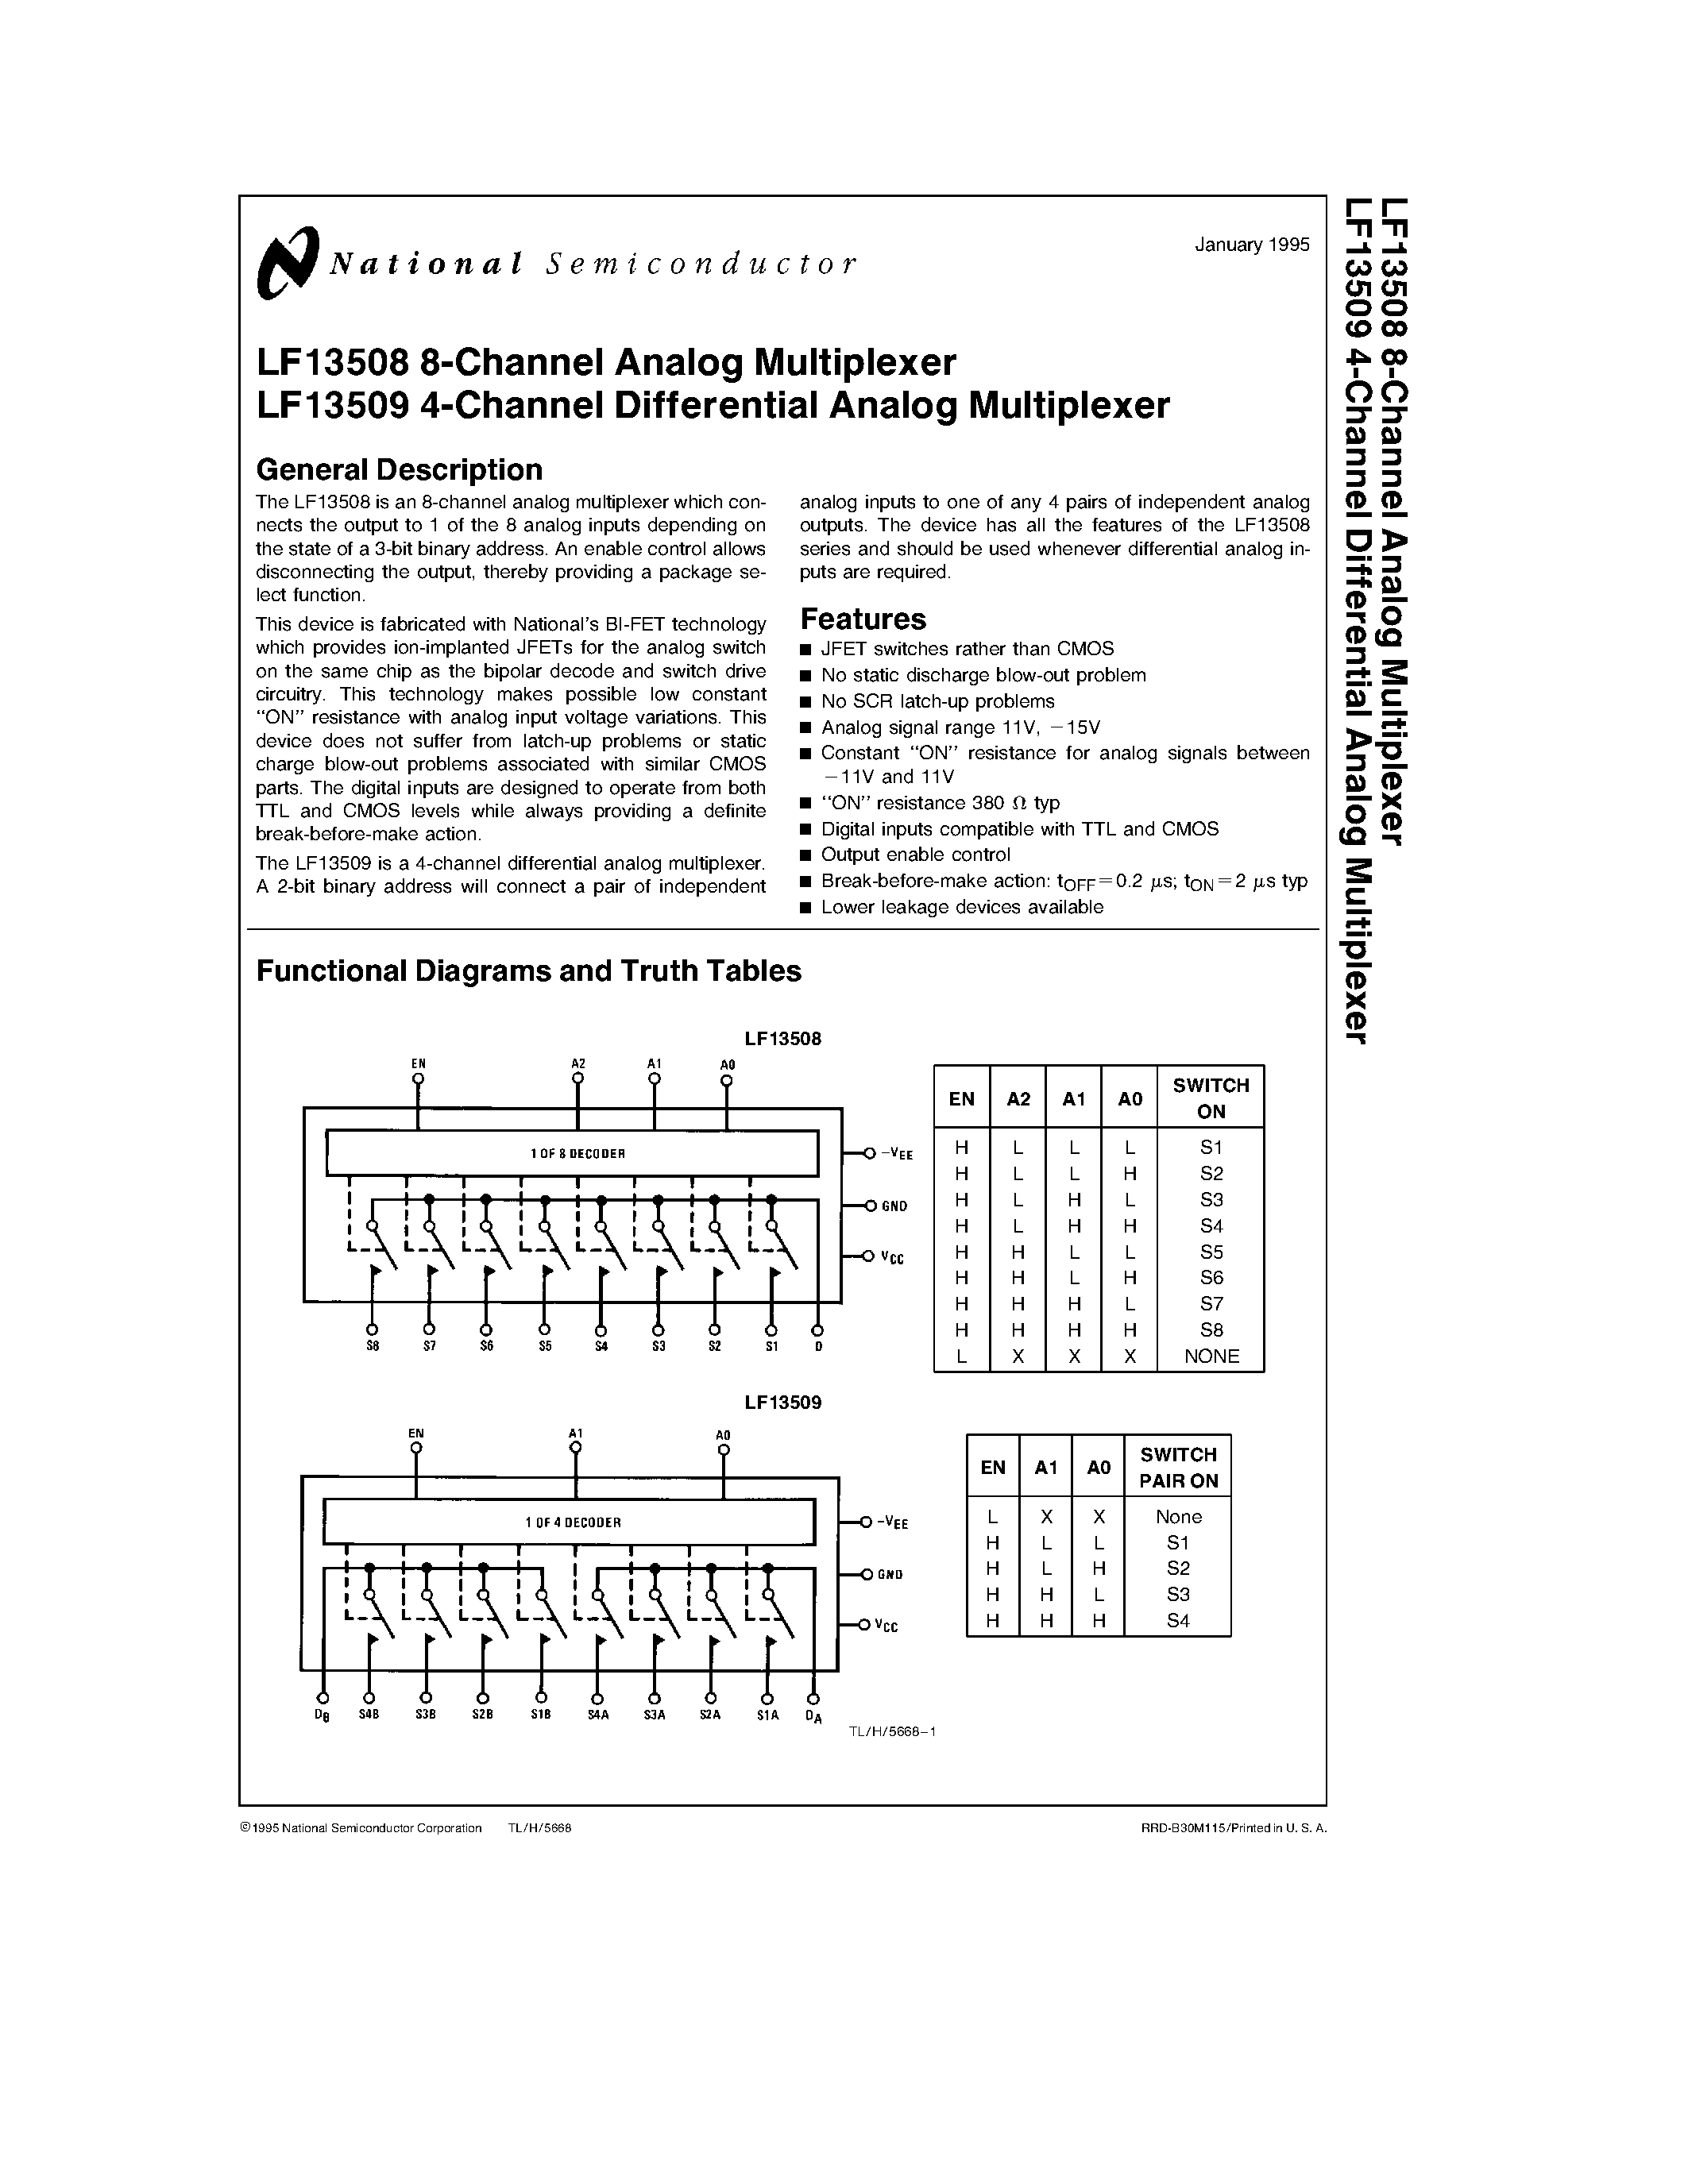 Даташит LF13508 - (LF13508) 4-Channel Differential Analog Multiplexer страница 1